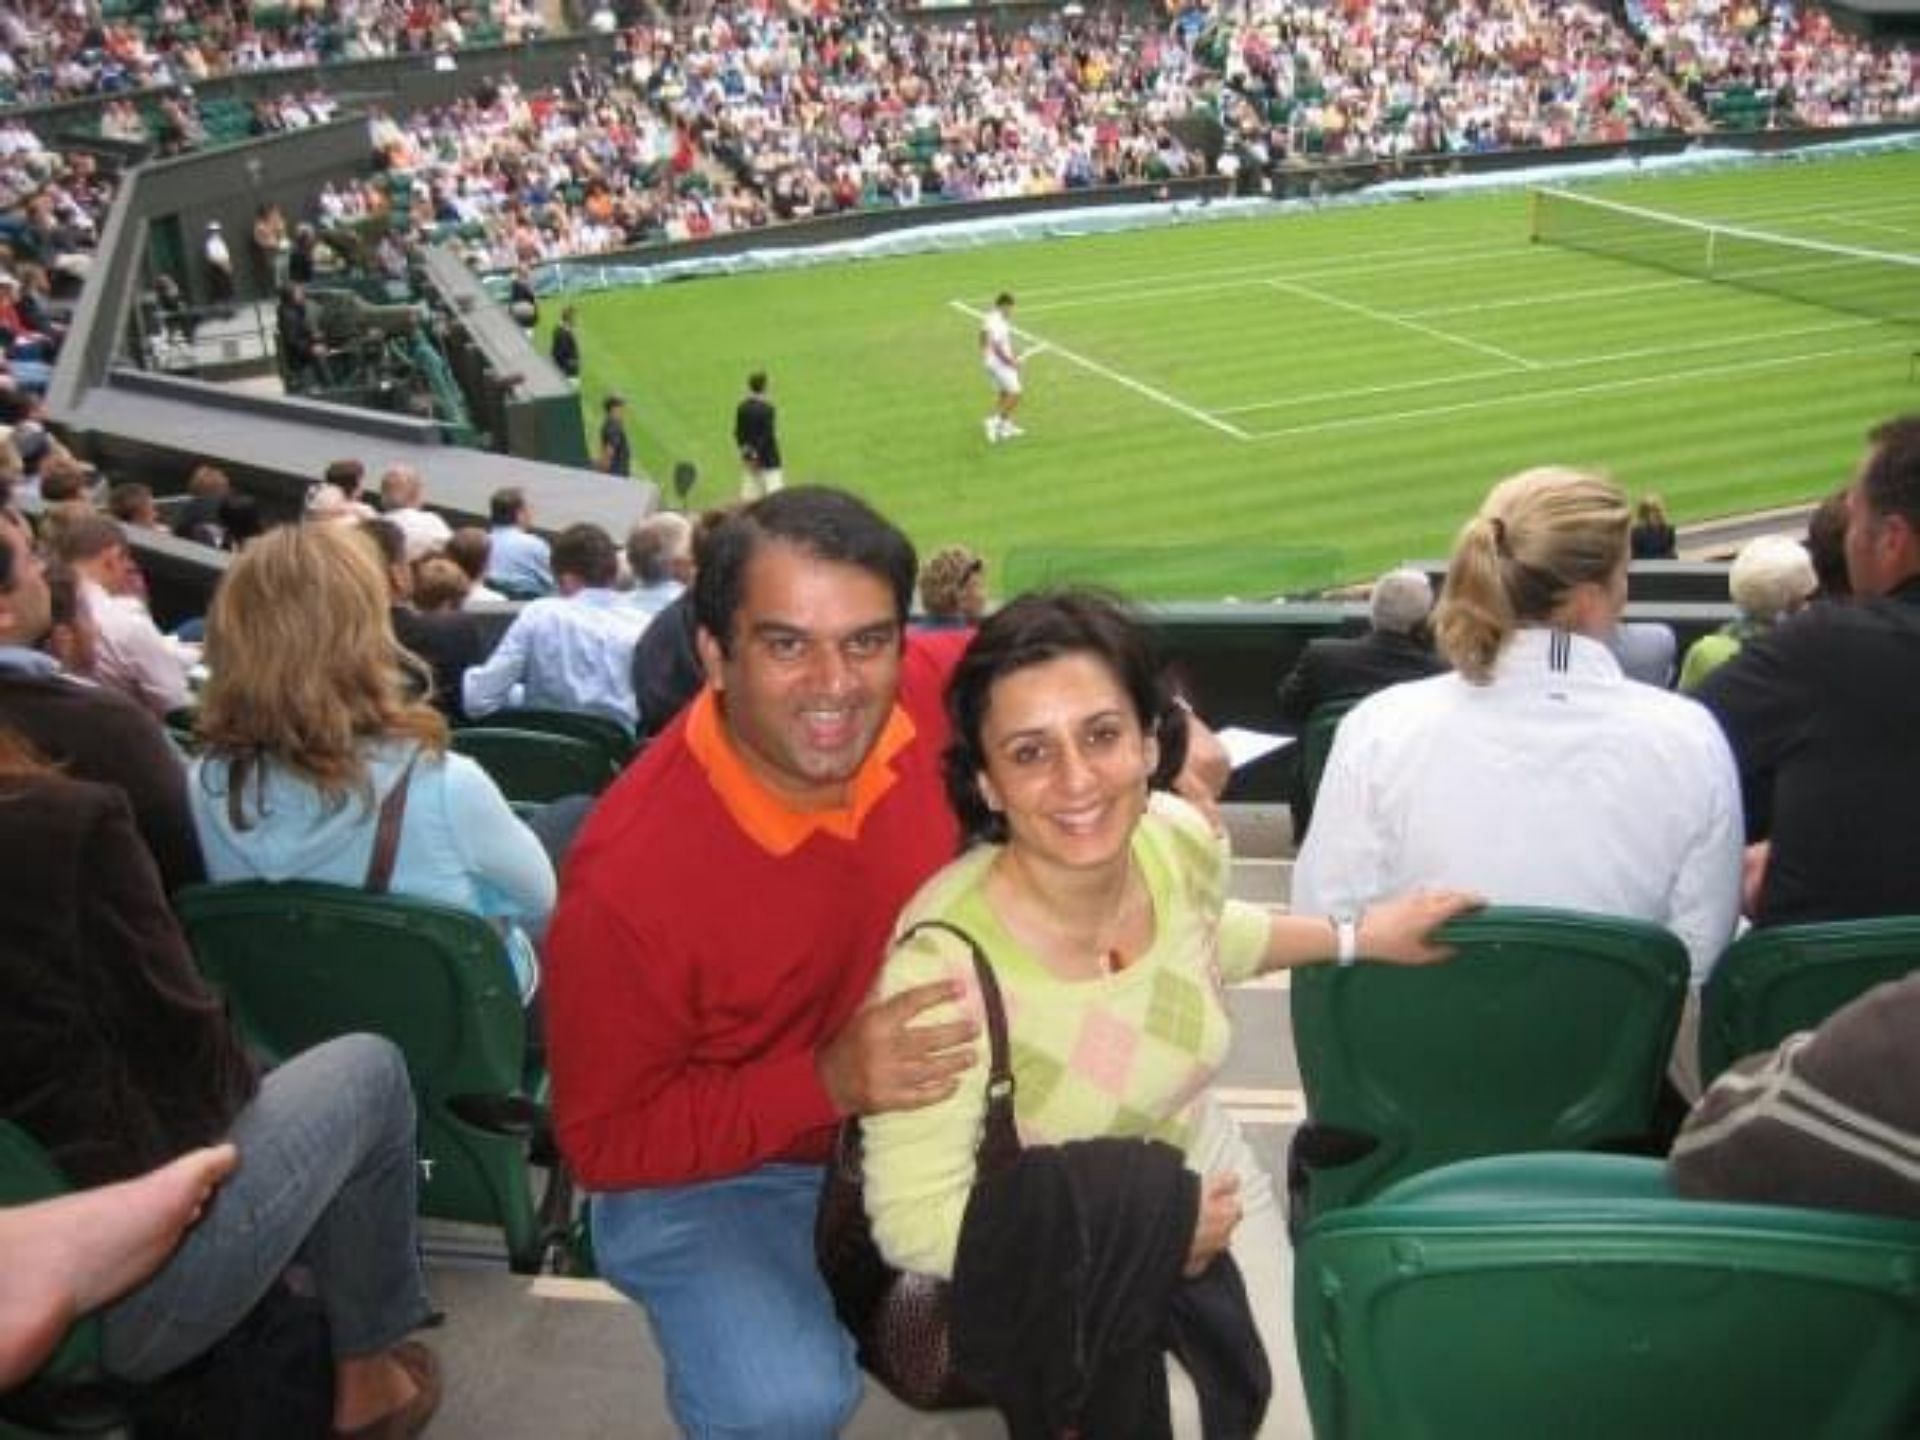 Mr. P.K. Basu and his wife catch the action on Centre Court